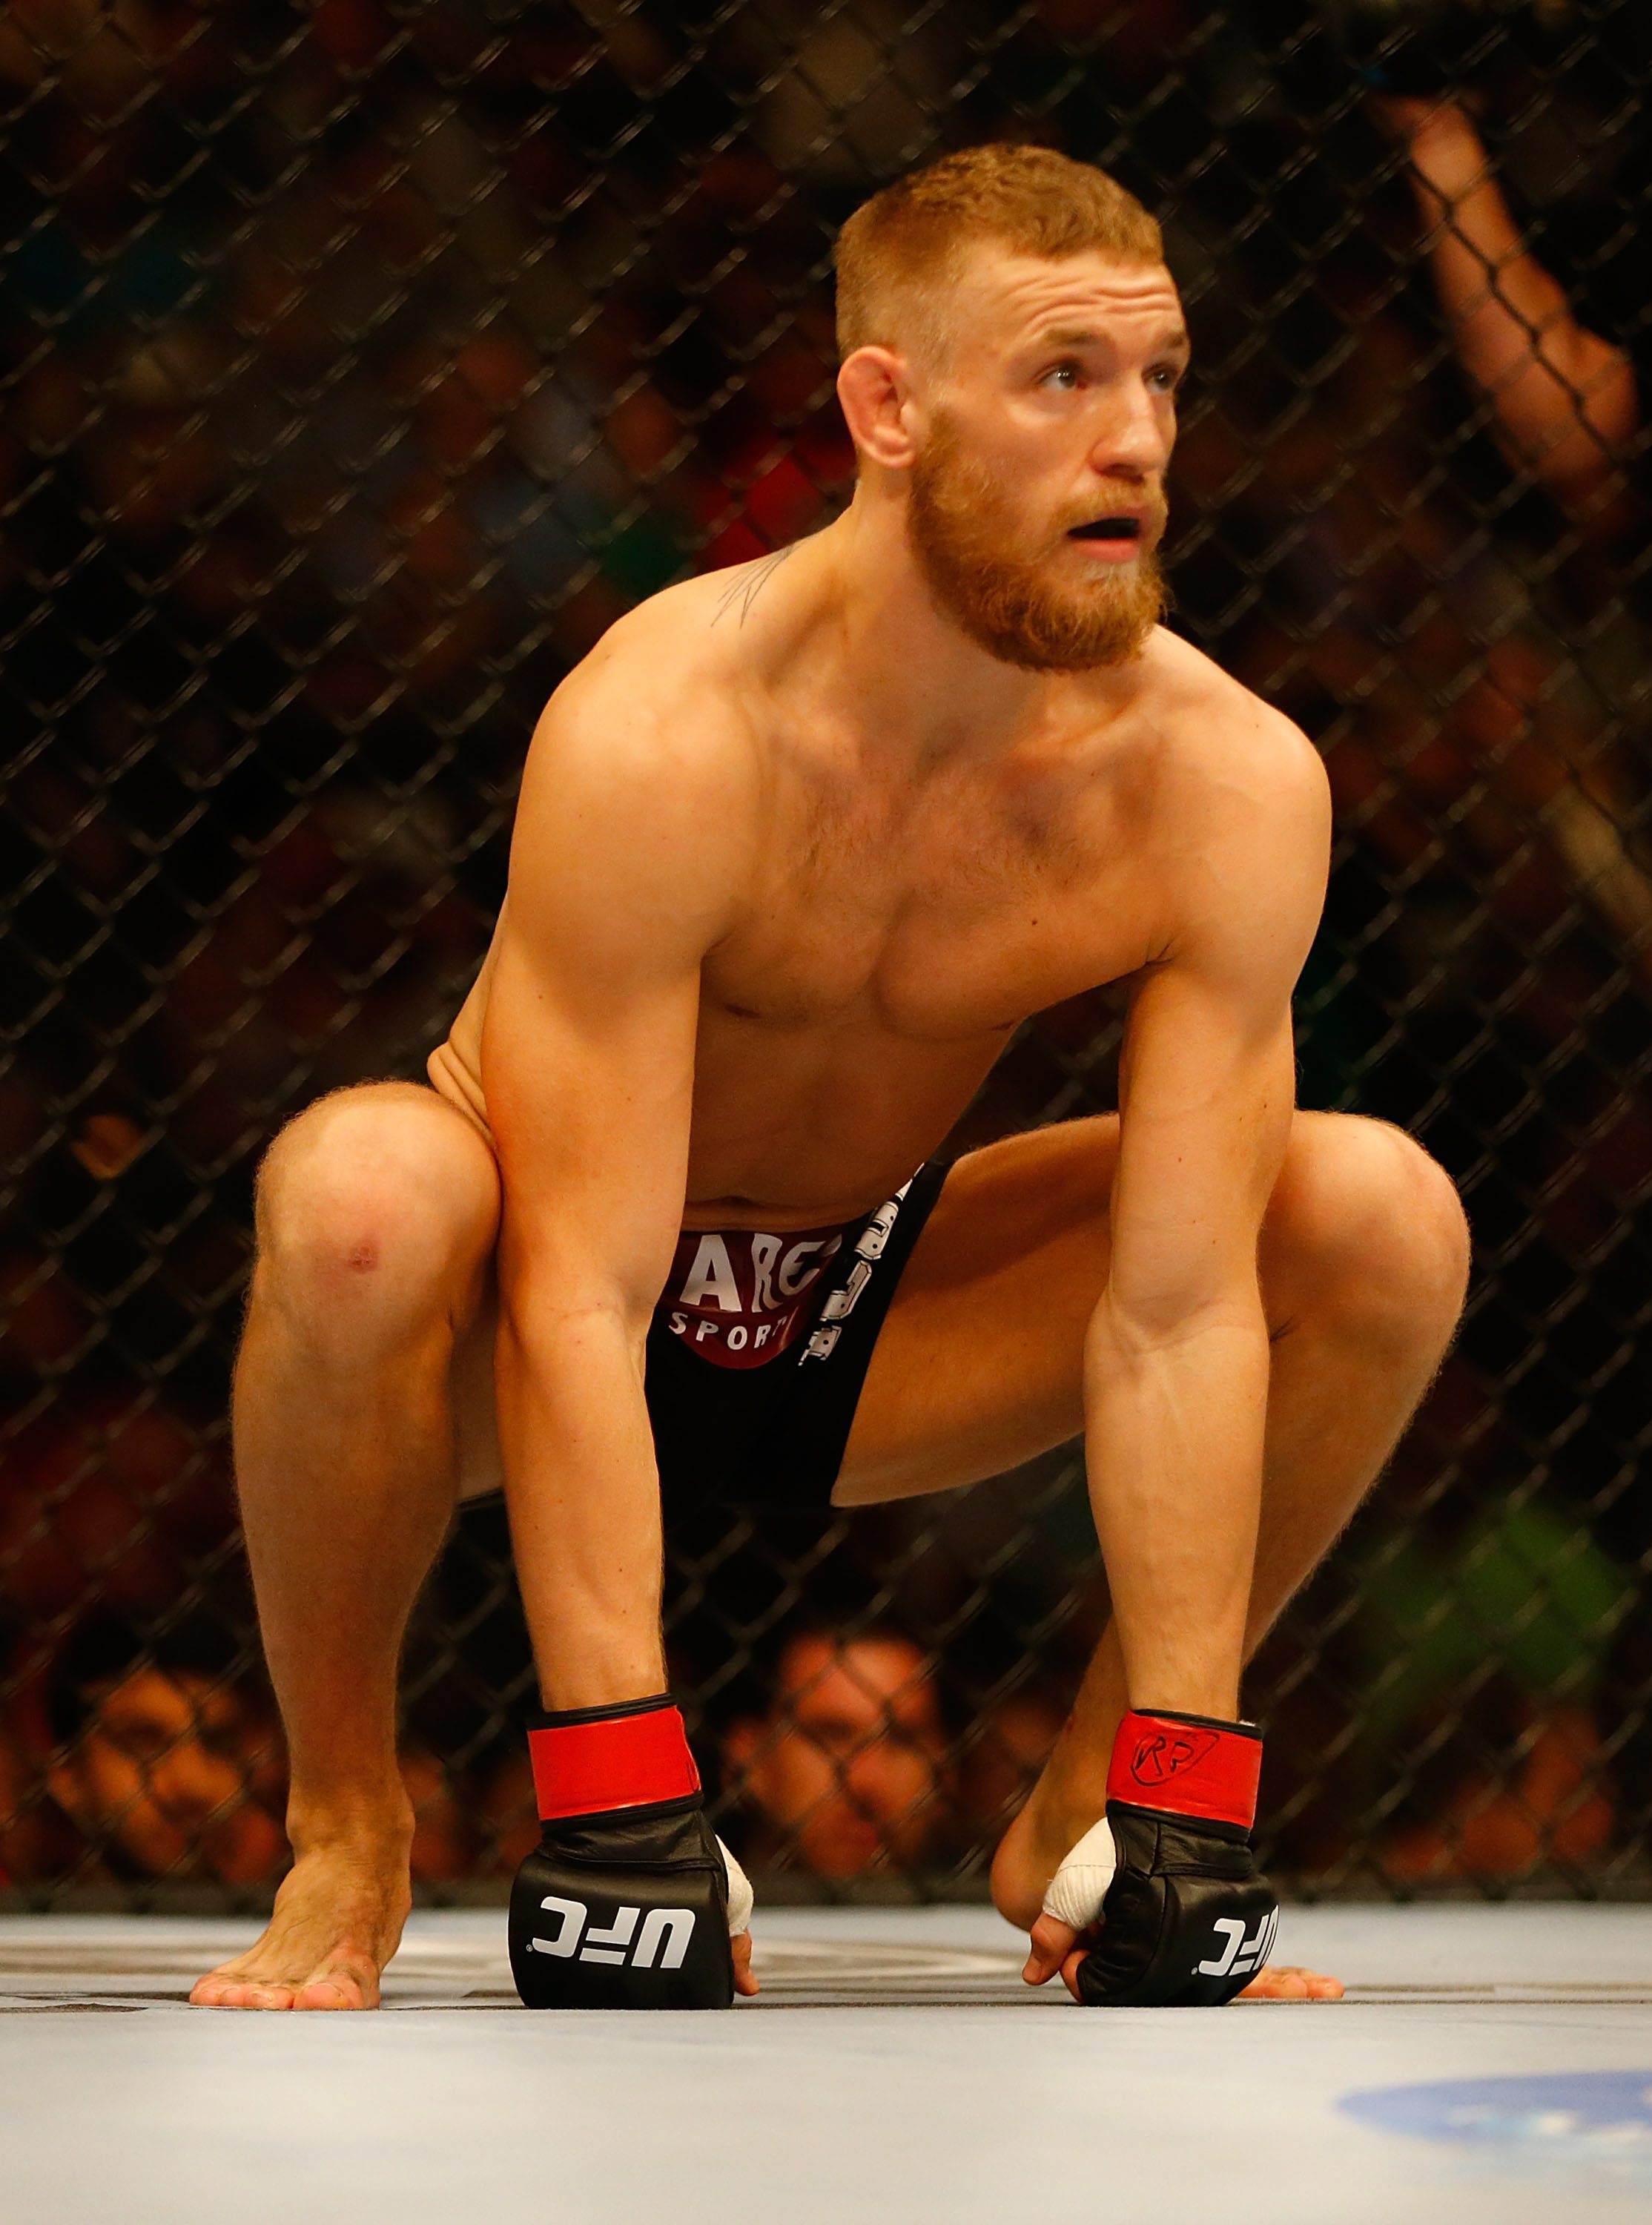 Conor McGregor HD Wallpapers Free Download in High Quality and Resolution2228 x 3000